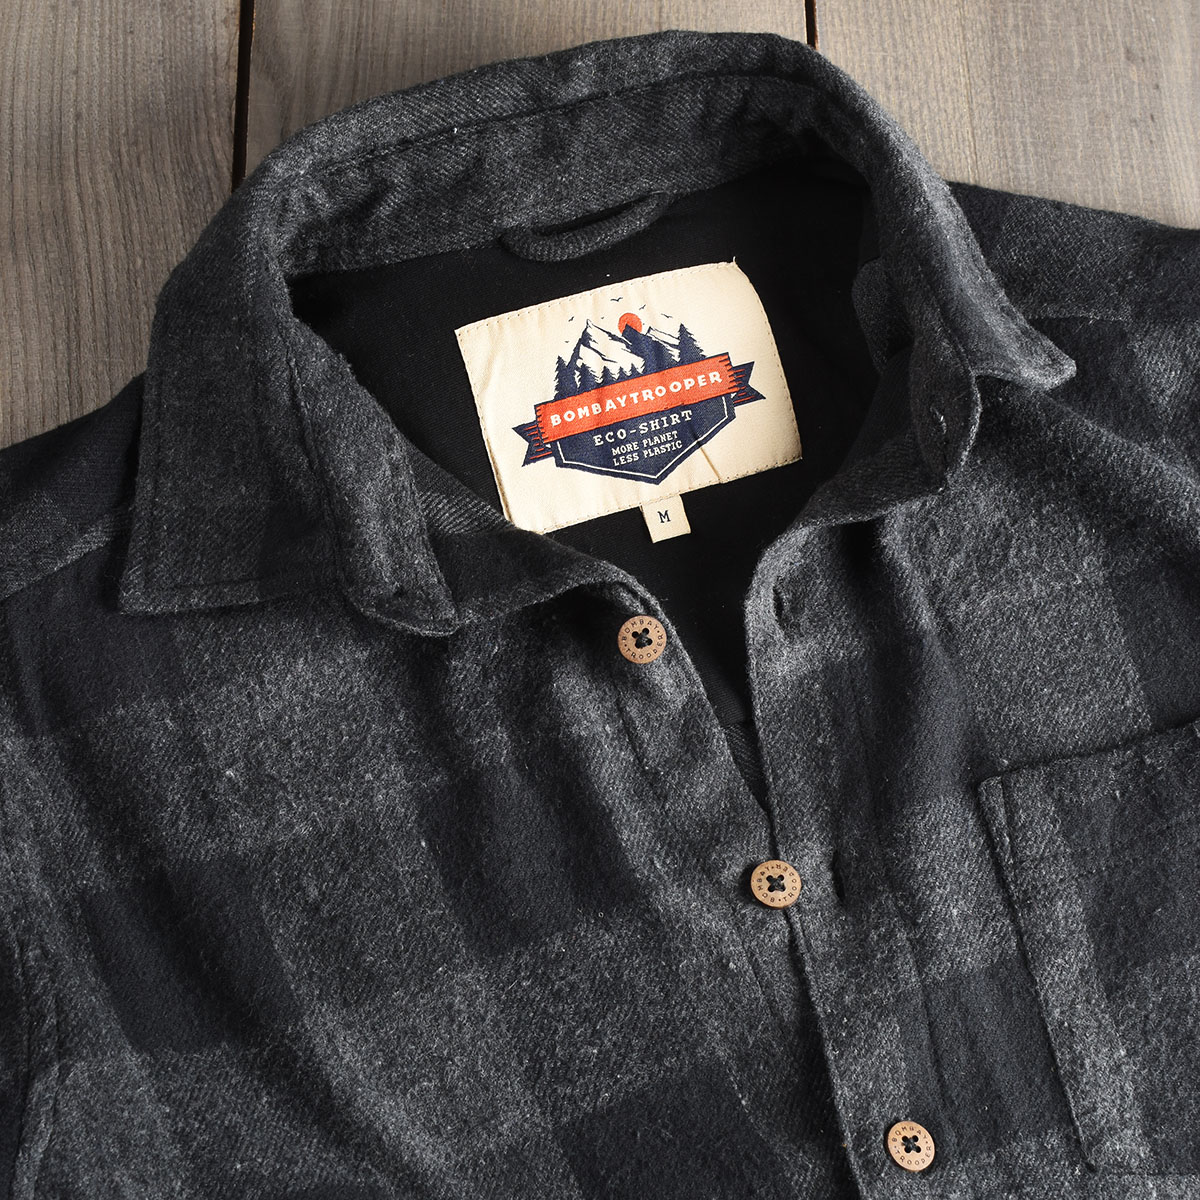 Eco-Shirt by Bombay Trooper  by Bombay Trooper